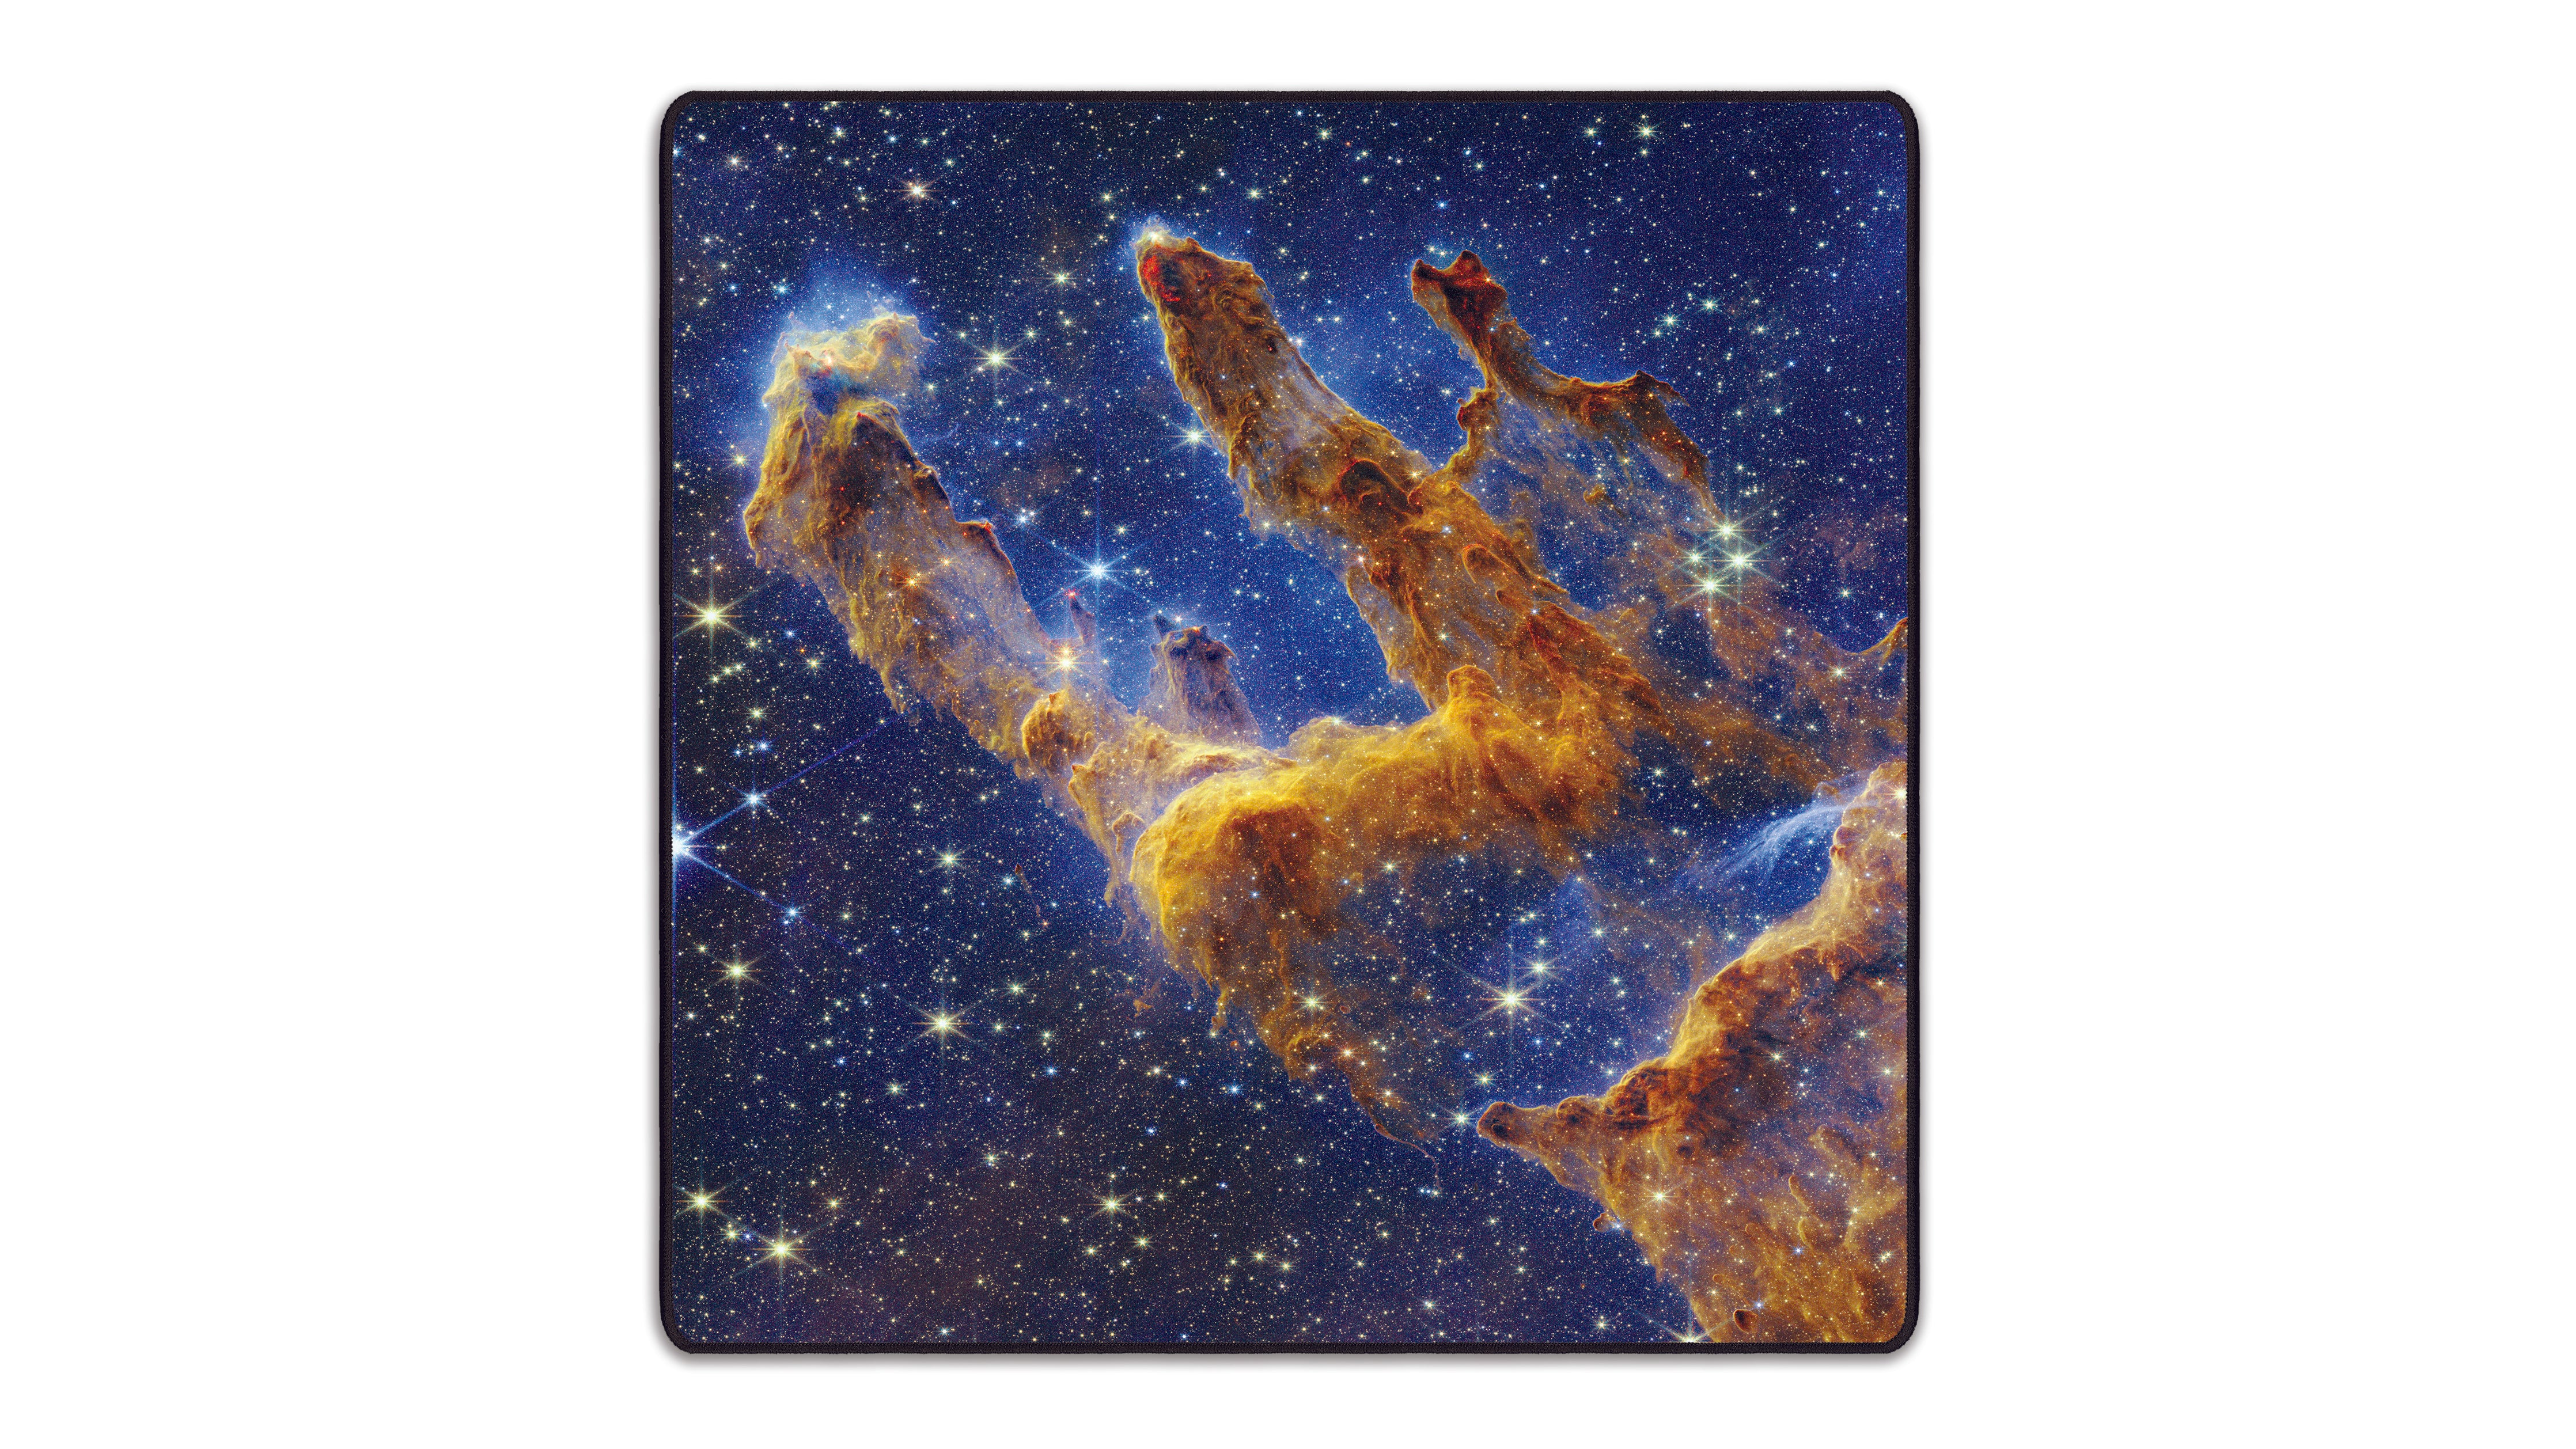 Pillars of Creation by James Webb Space Telescope - The Mousepad Company